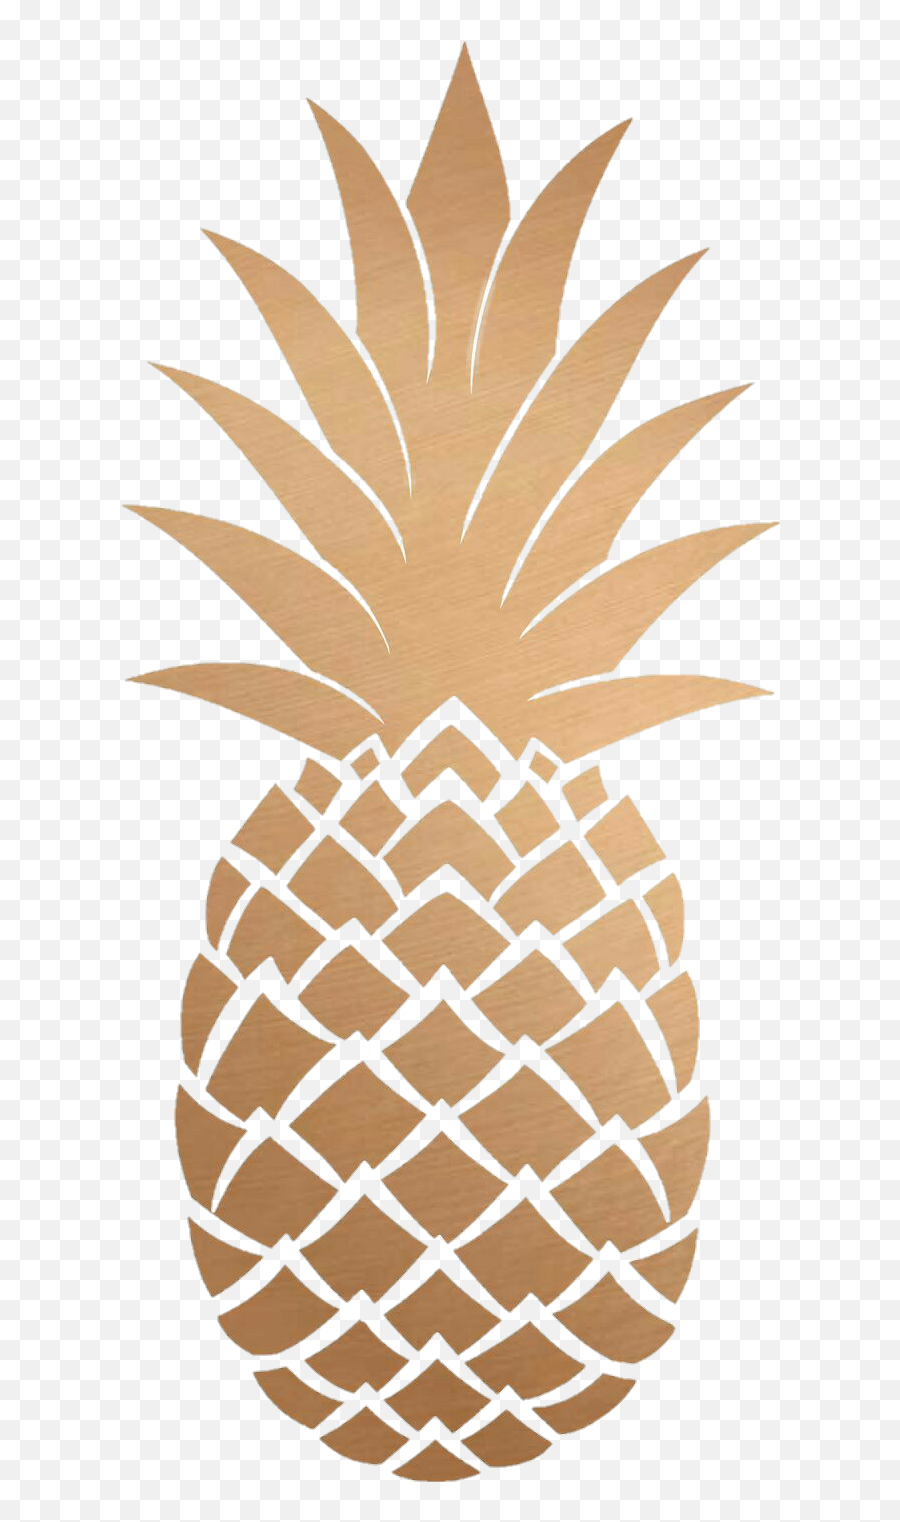 Download Cute Pineapple Png Image With No Background - Pineapple Cartoon Emoji,Pineapple Png